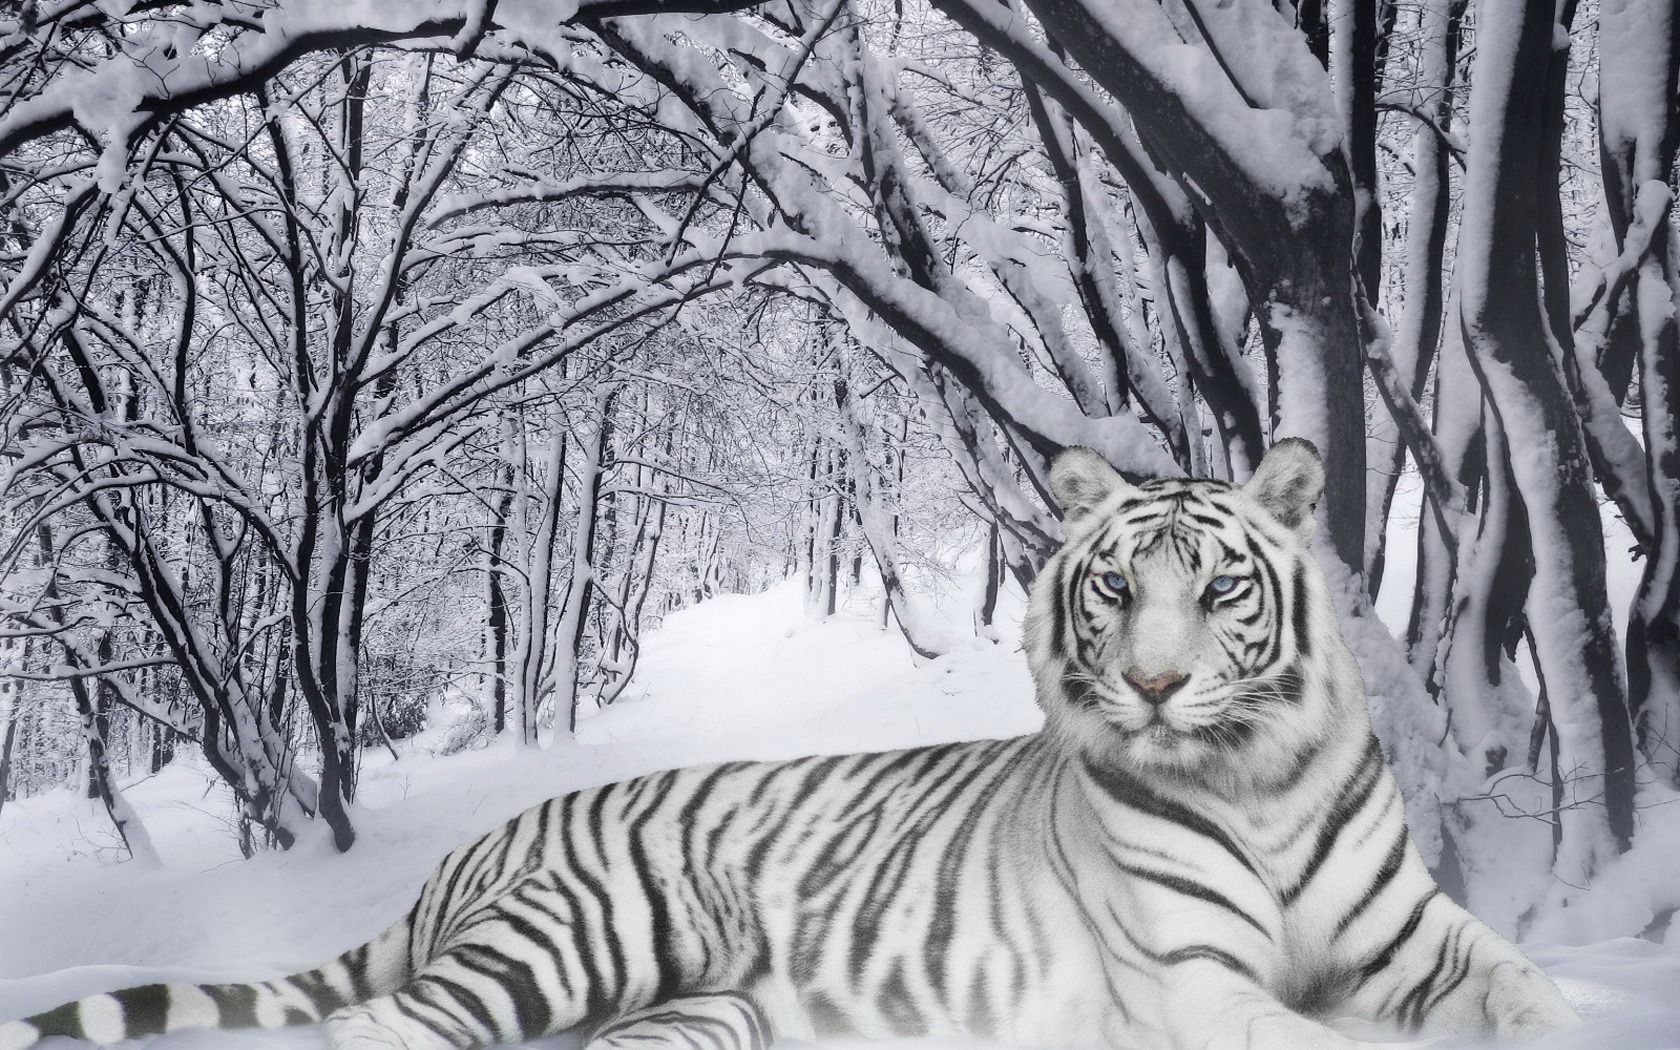 White Tiger Wallpaper Tigers Animals Wallpapers in jpg format for 1680x1050